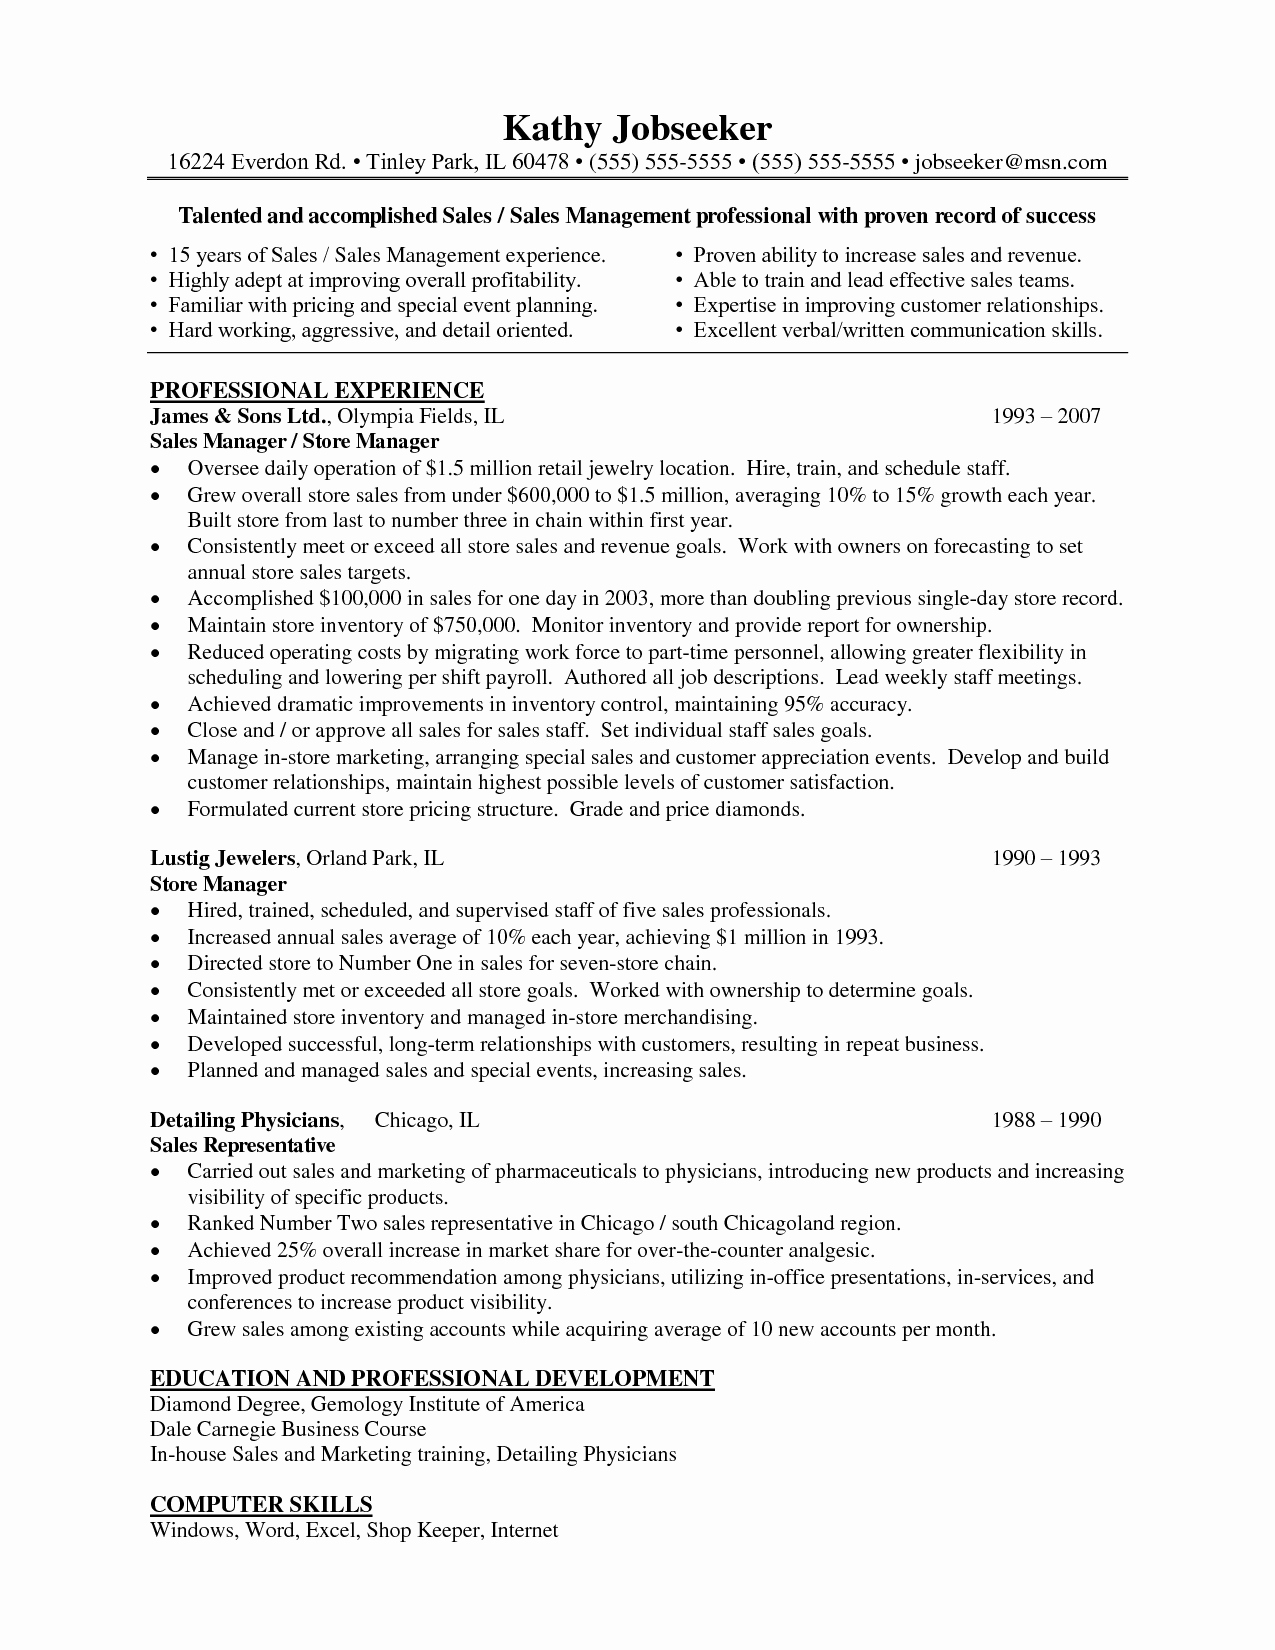 Retail assistant Manager Resume Objective Examples